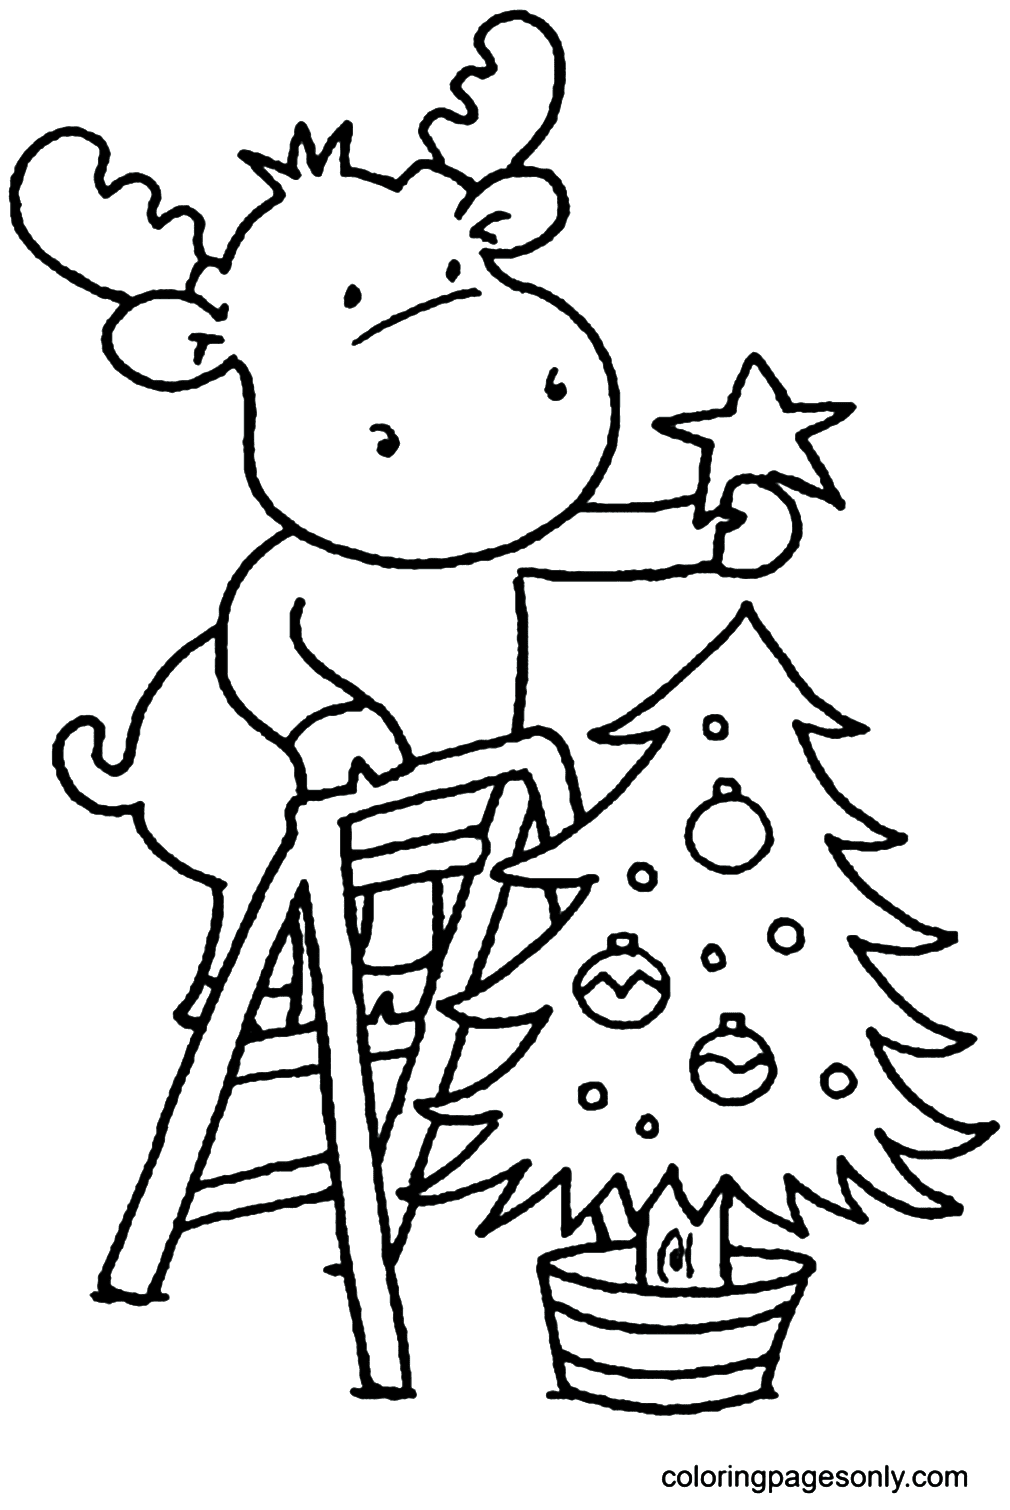 Reindeer Decorating Christmas Tree Coloring Page